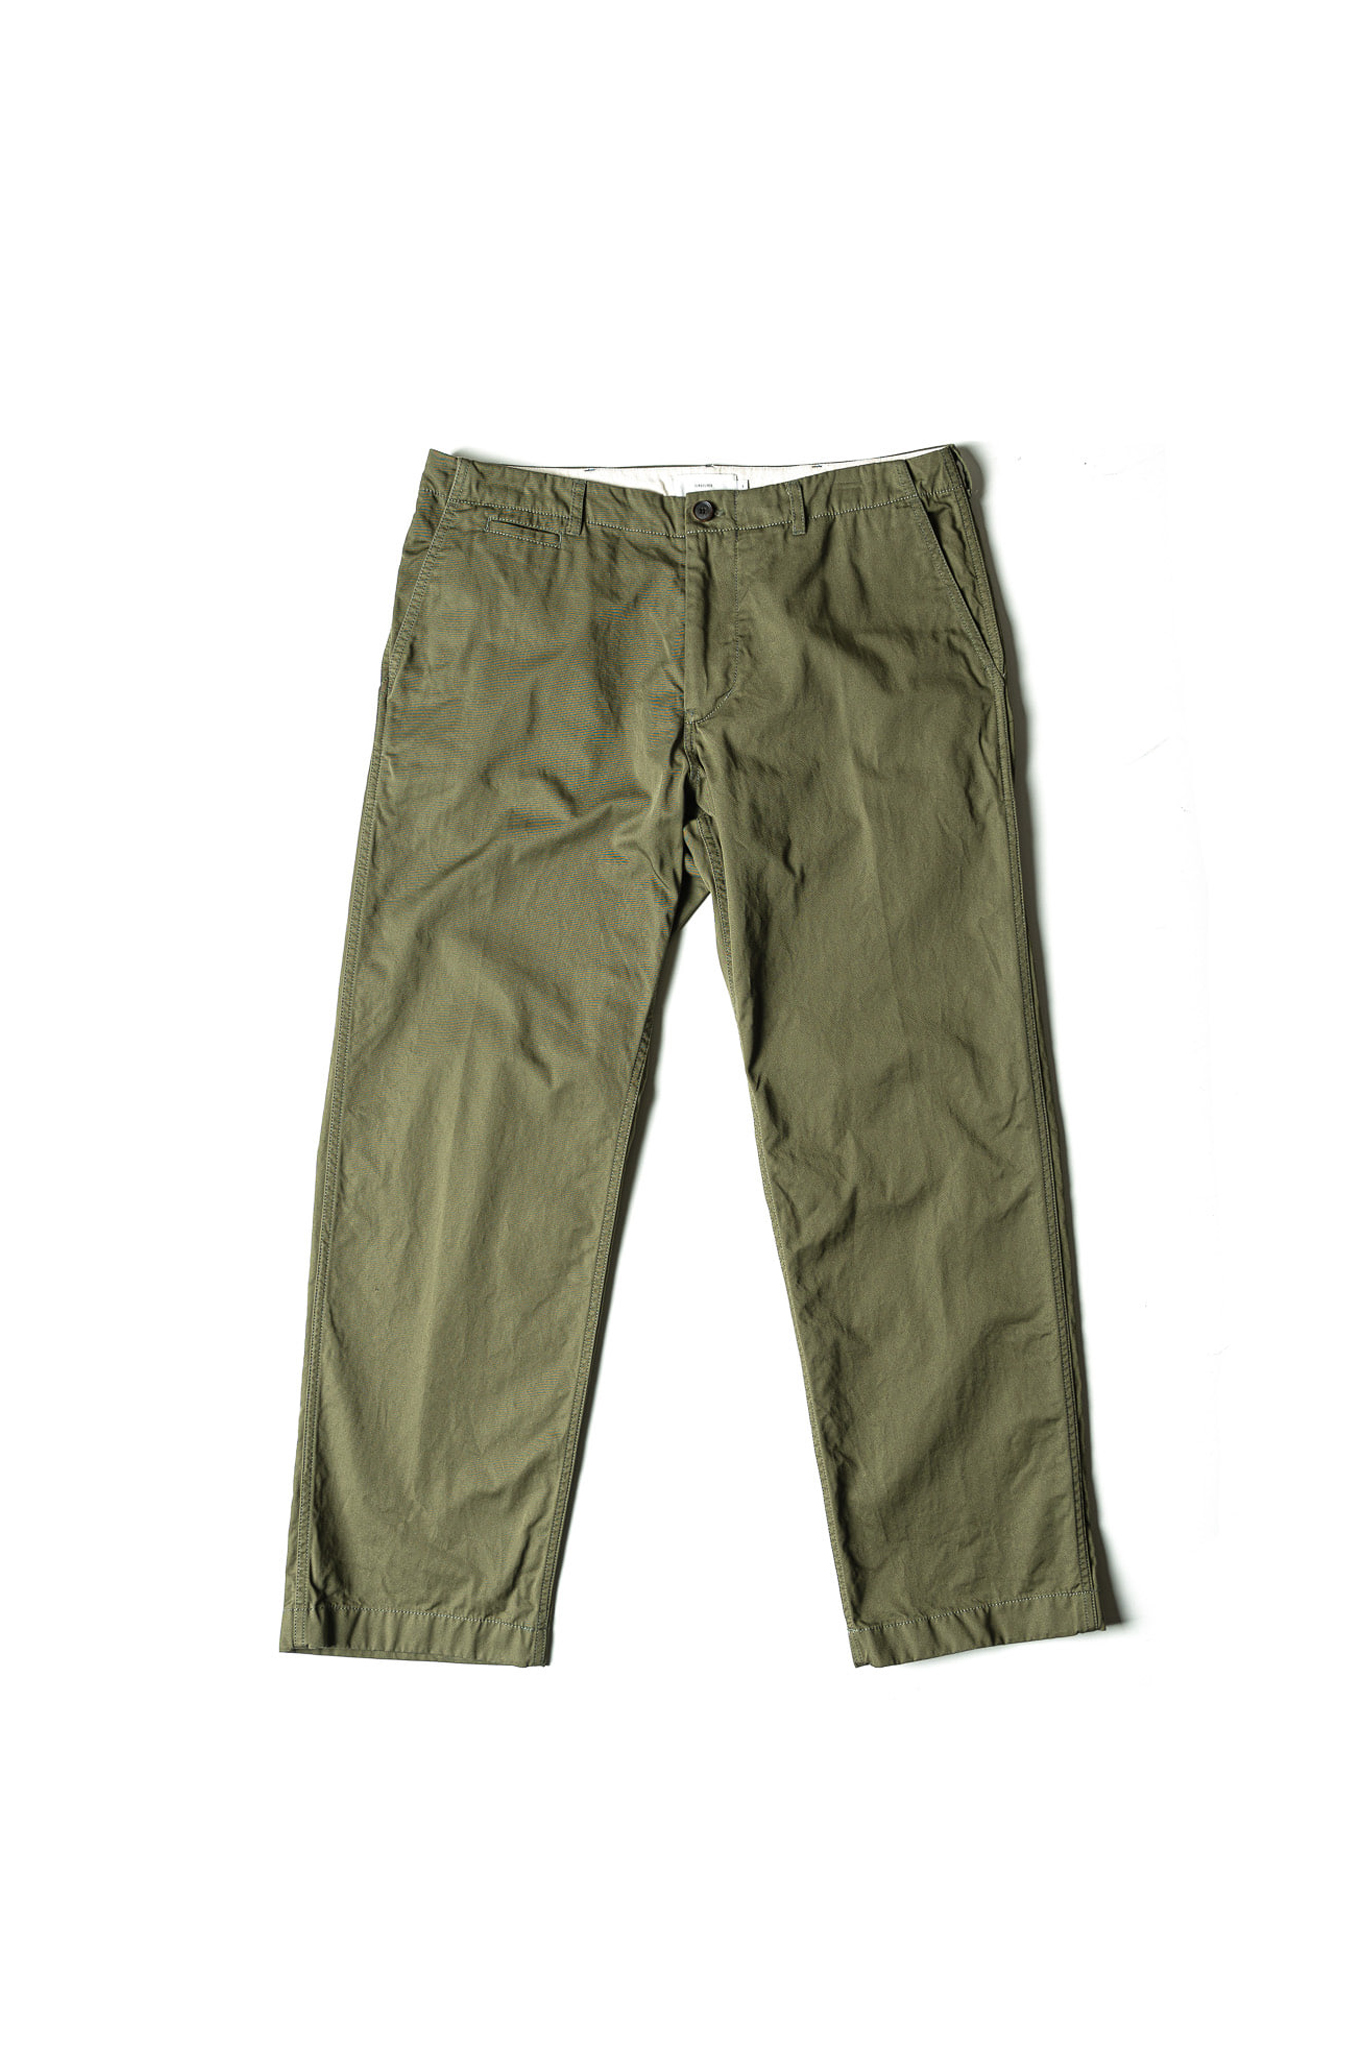 VINTAGE COTTON RELAXED CHINO PANTS - OLIVE